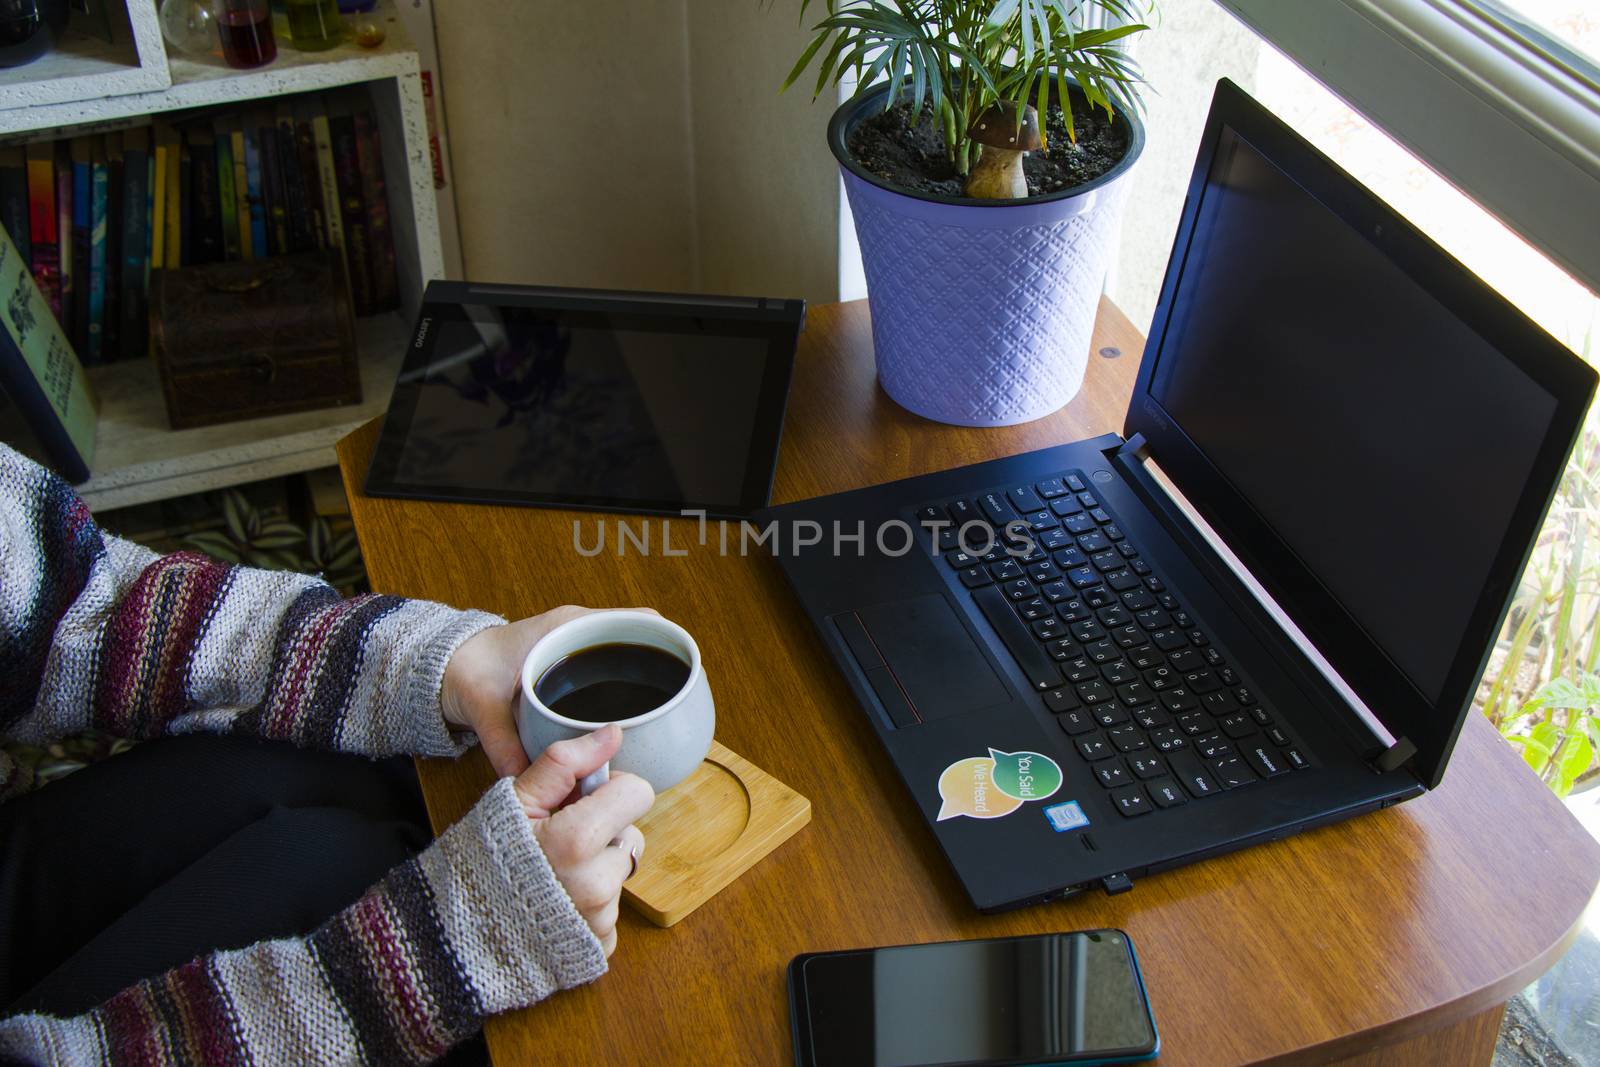 Tbilisi, Georgia - October 09, 2020: Woman working with notebook in workplace, digital tablet, mobile phone, coffee and plants in workspace, home working